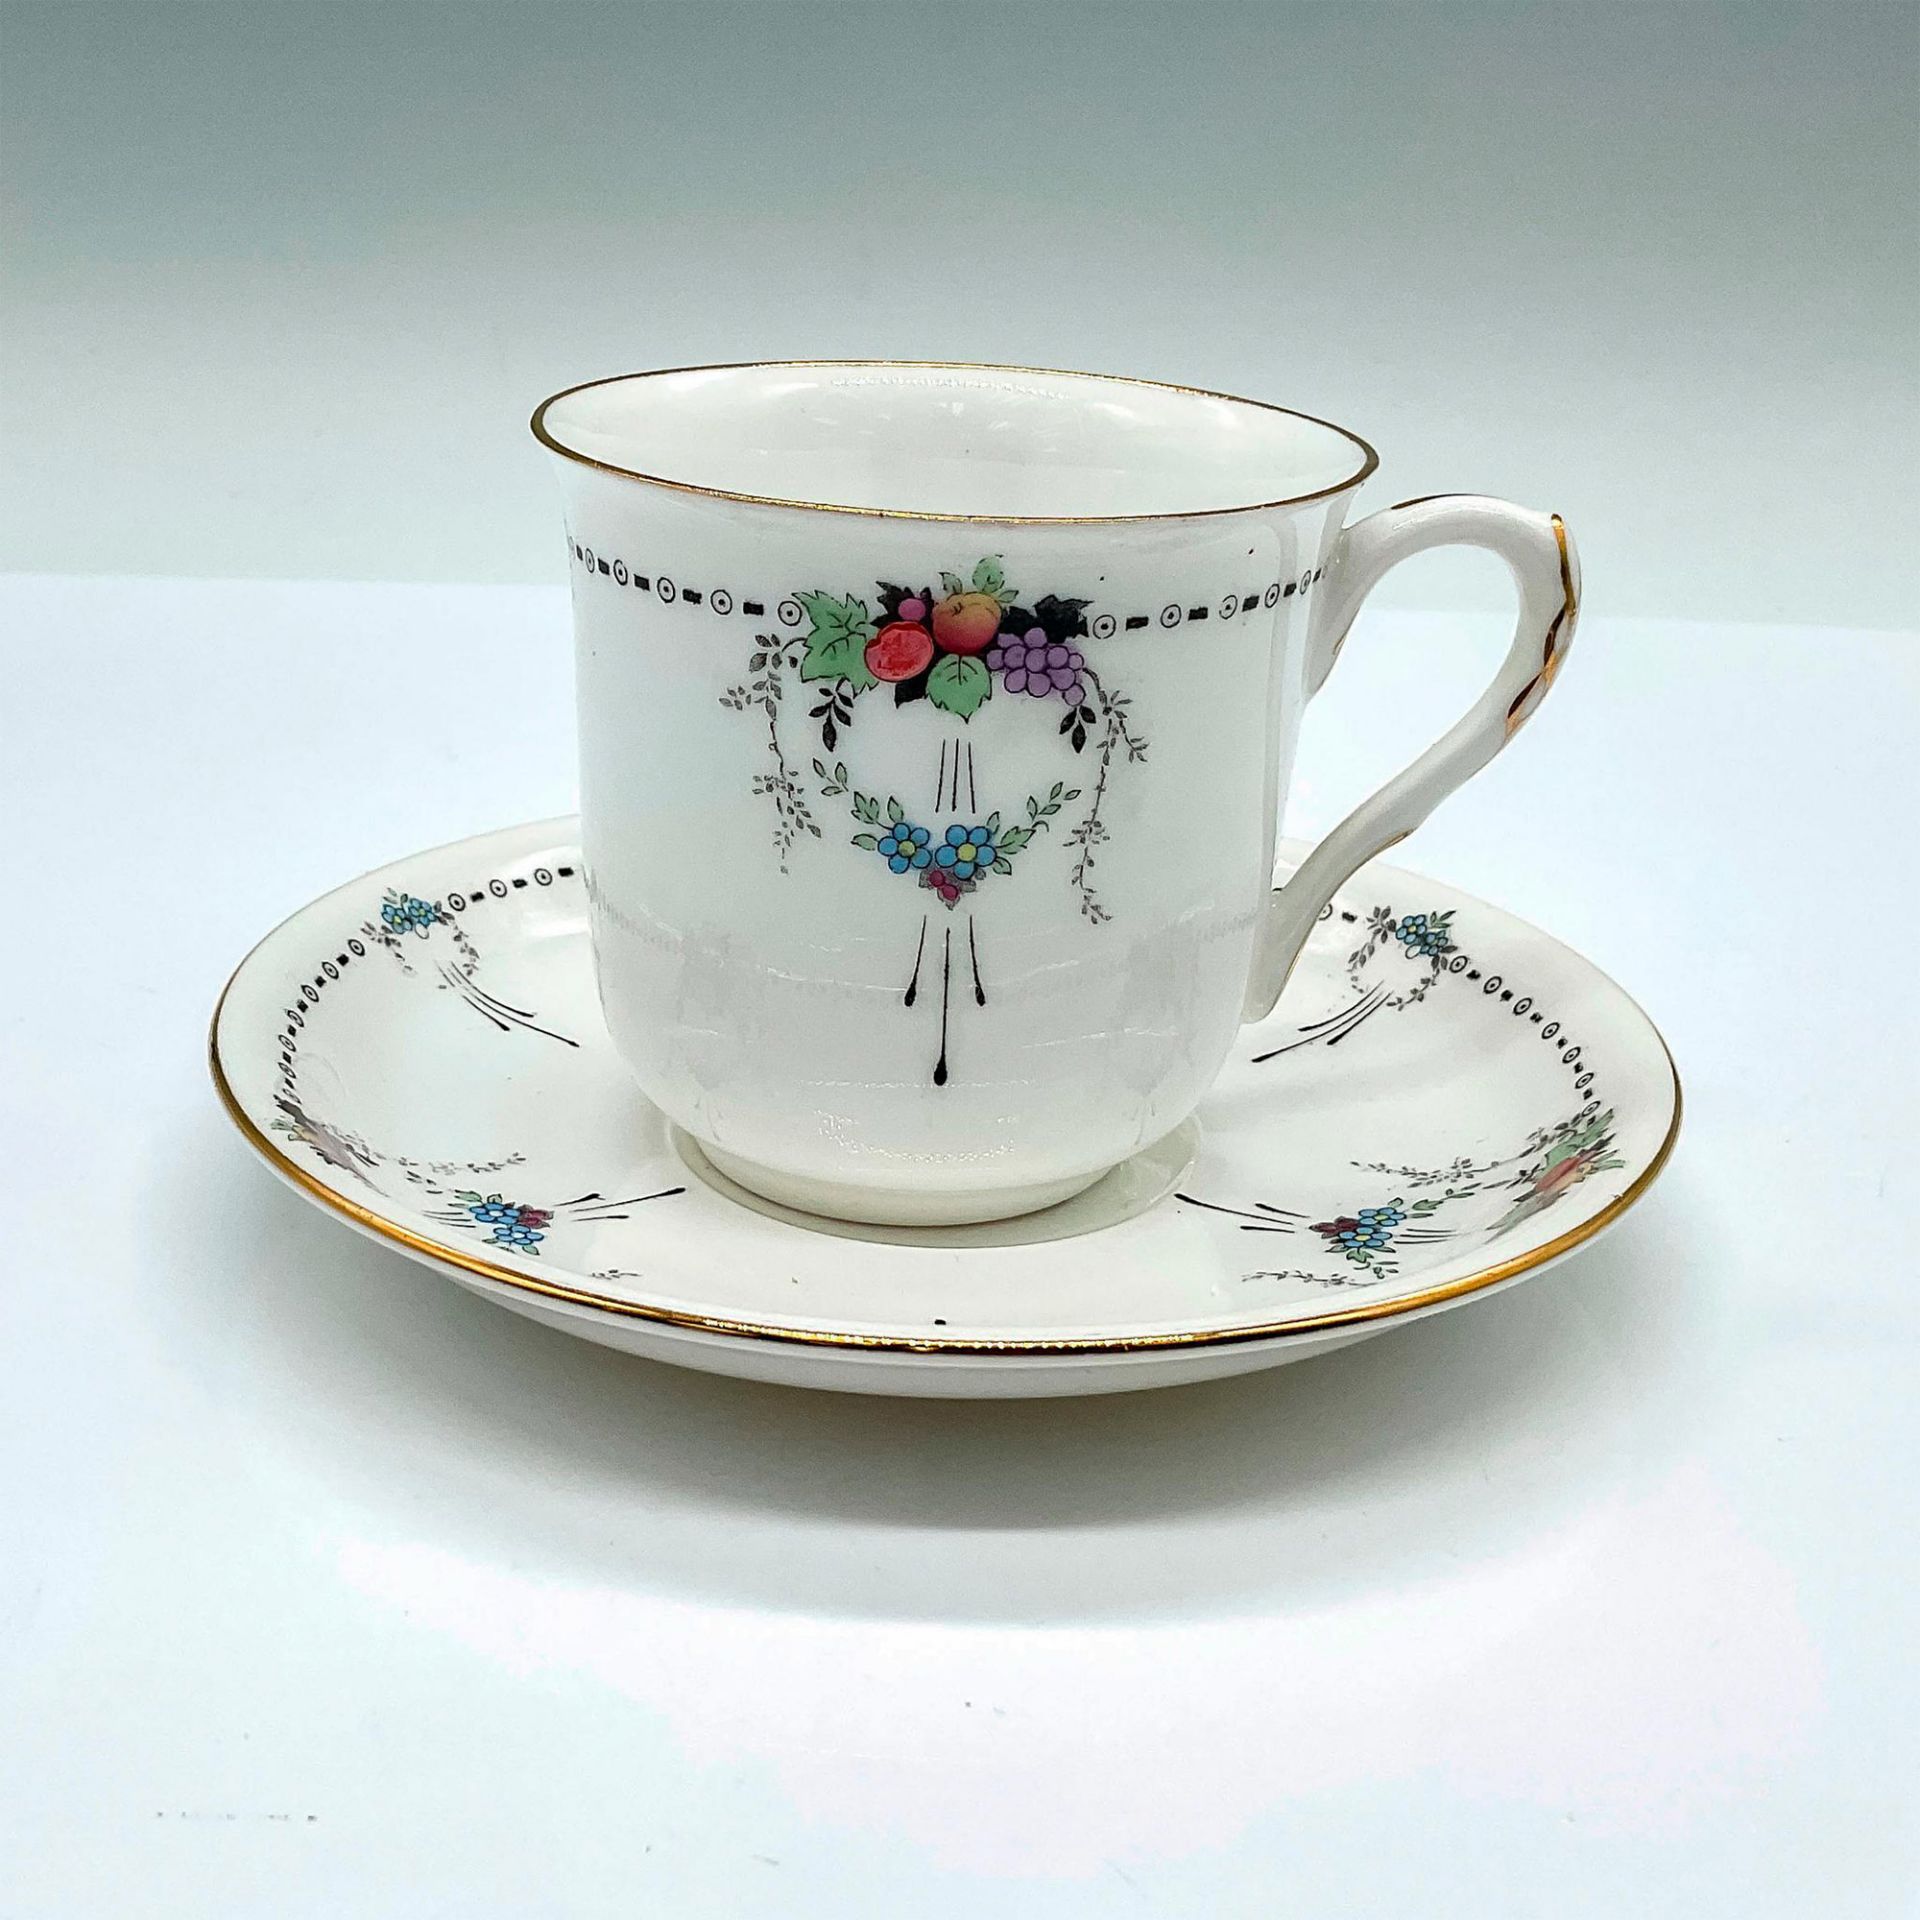 2pc Shelley China Fruit Teacup and Saucer